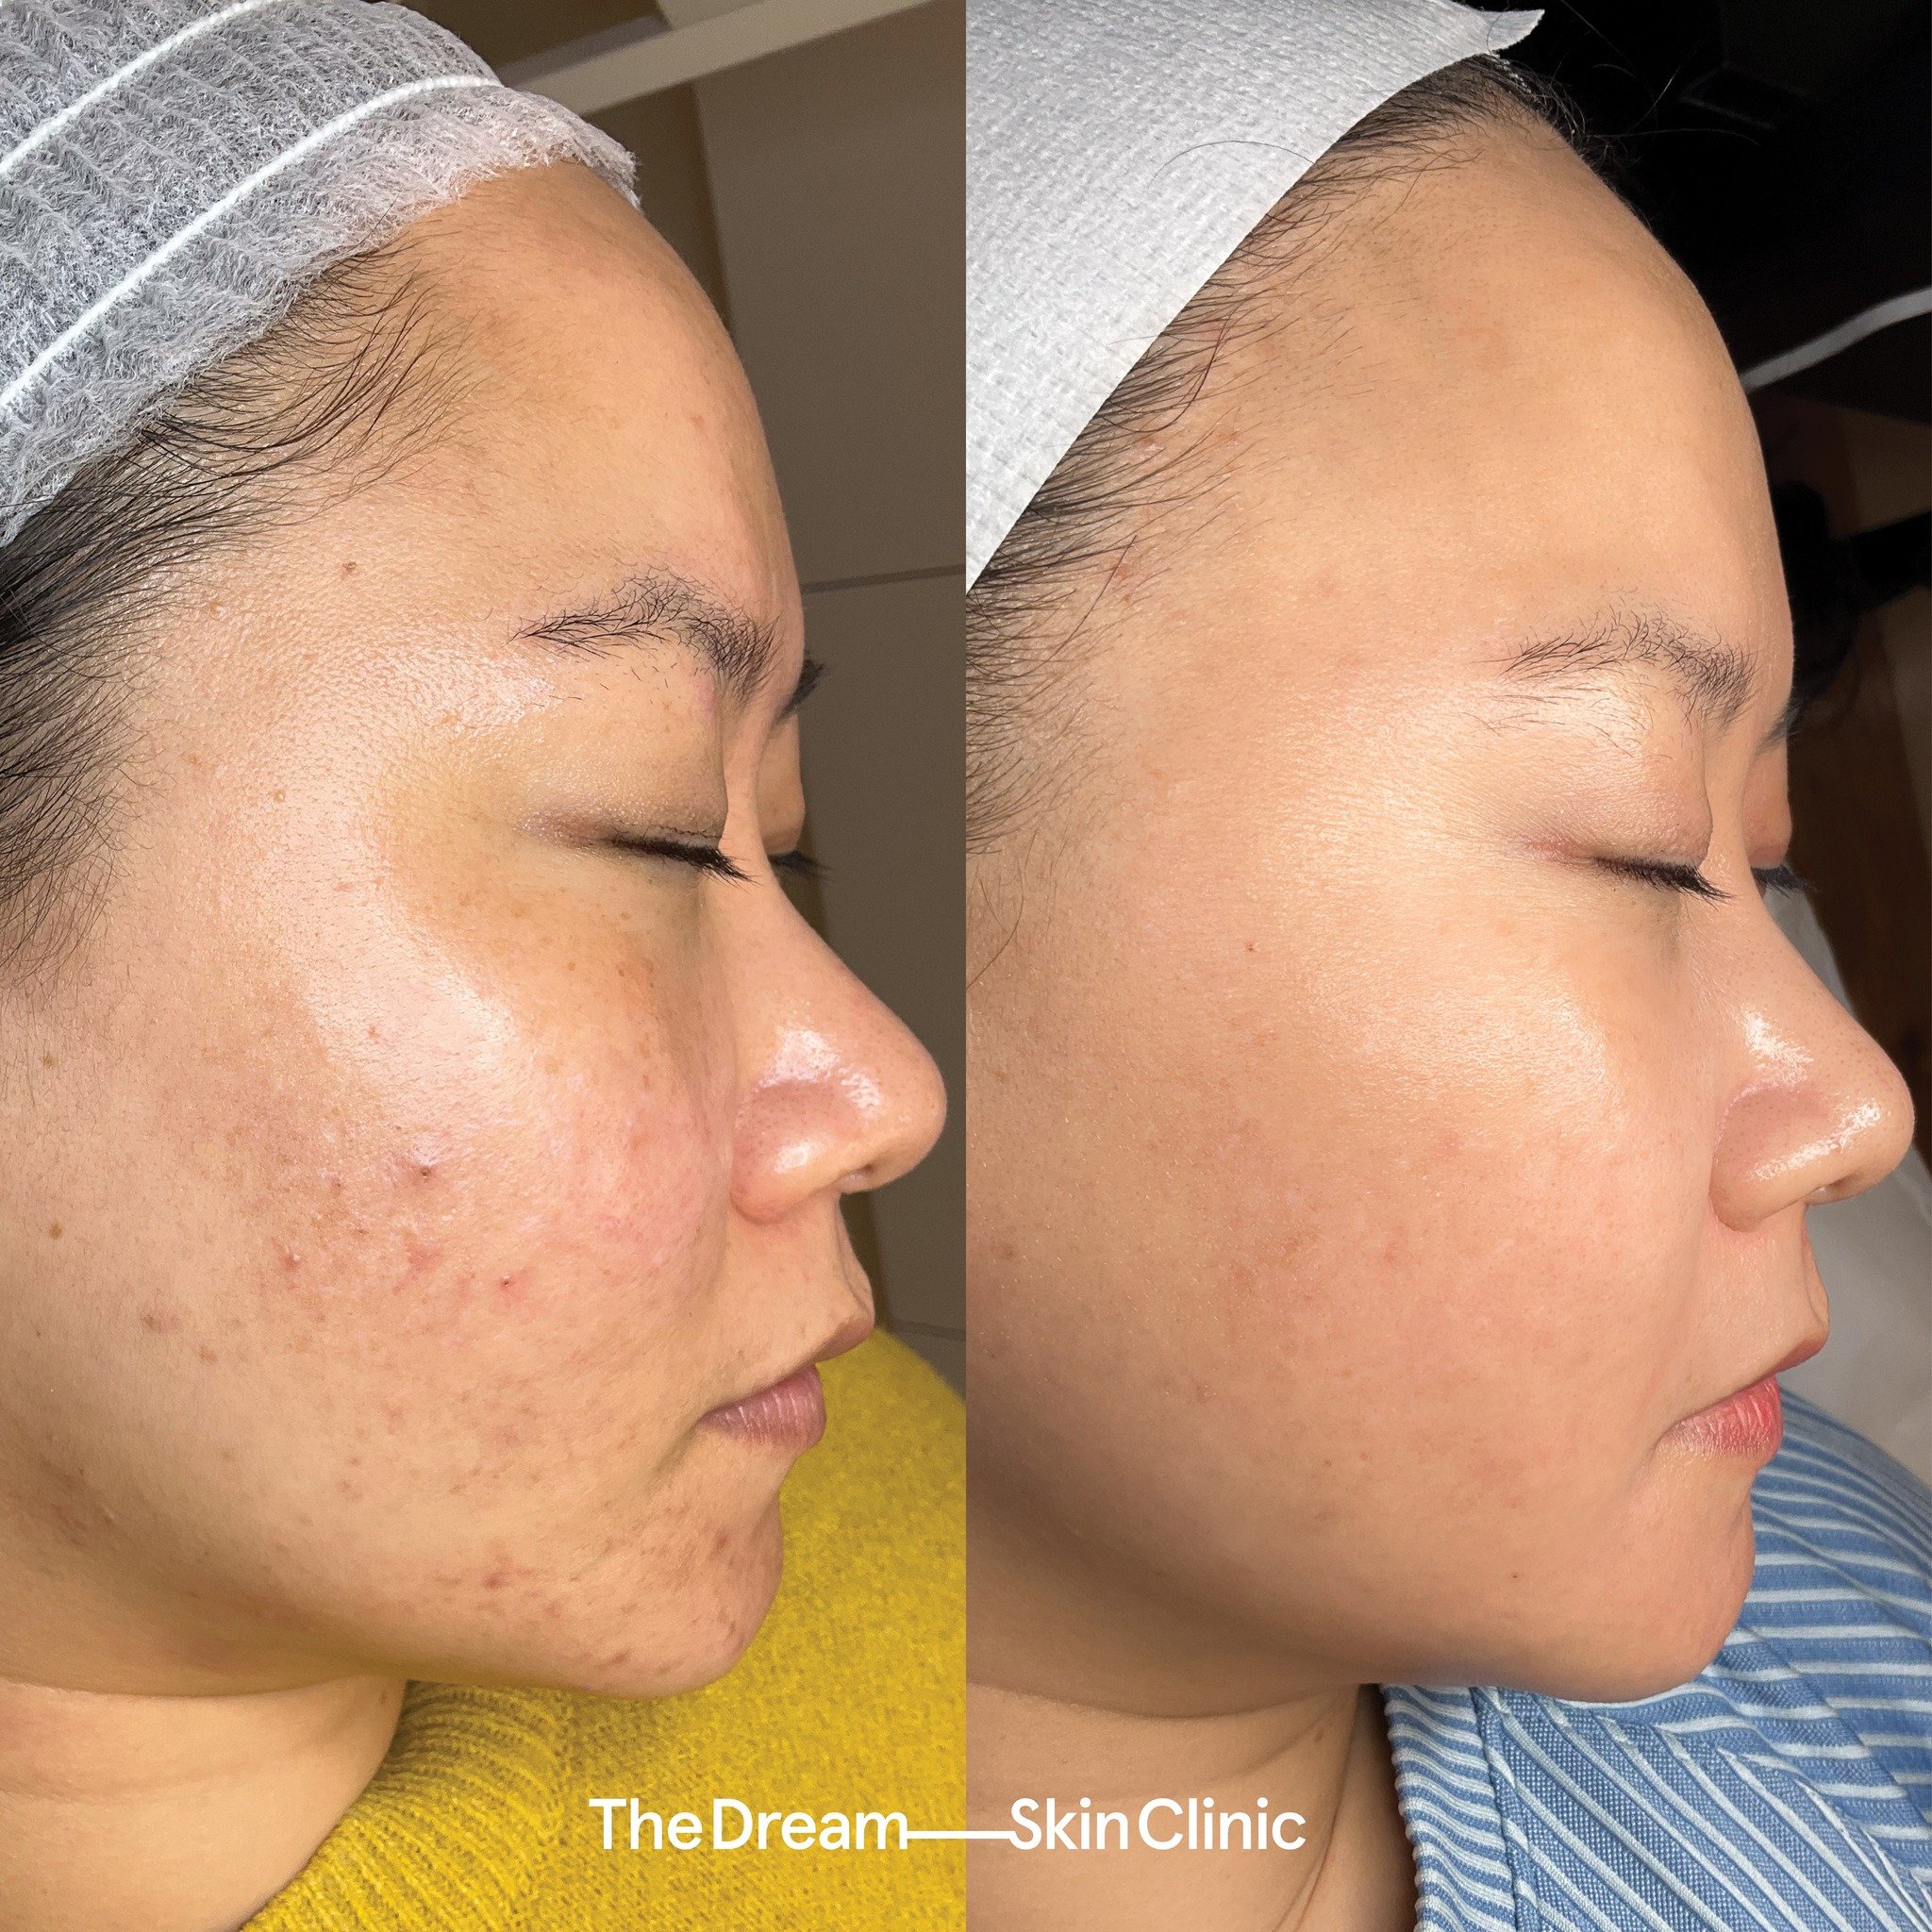 This client&rsquo;s concerns were:
∙ Congestion
∙ Pigmentation
∙ Scarring

Book a skin consultation using the link in our bio and get started on your skin journey with The Dream Skin Clinic!

*These photographs were captured and shared with client co